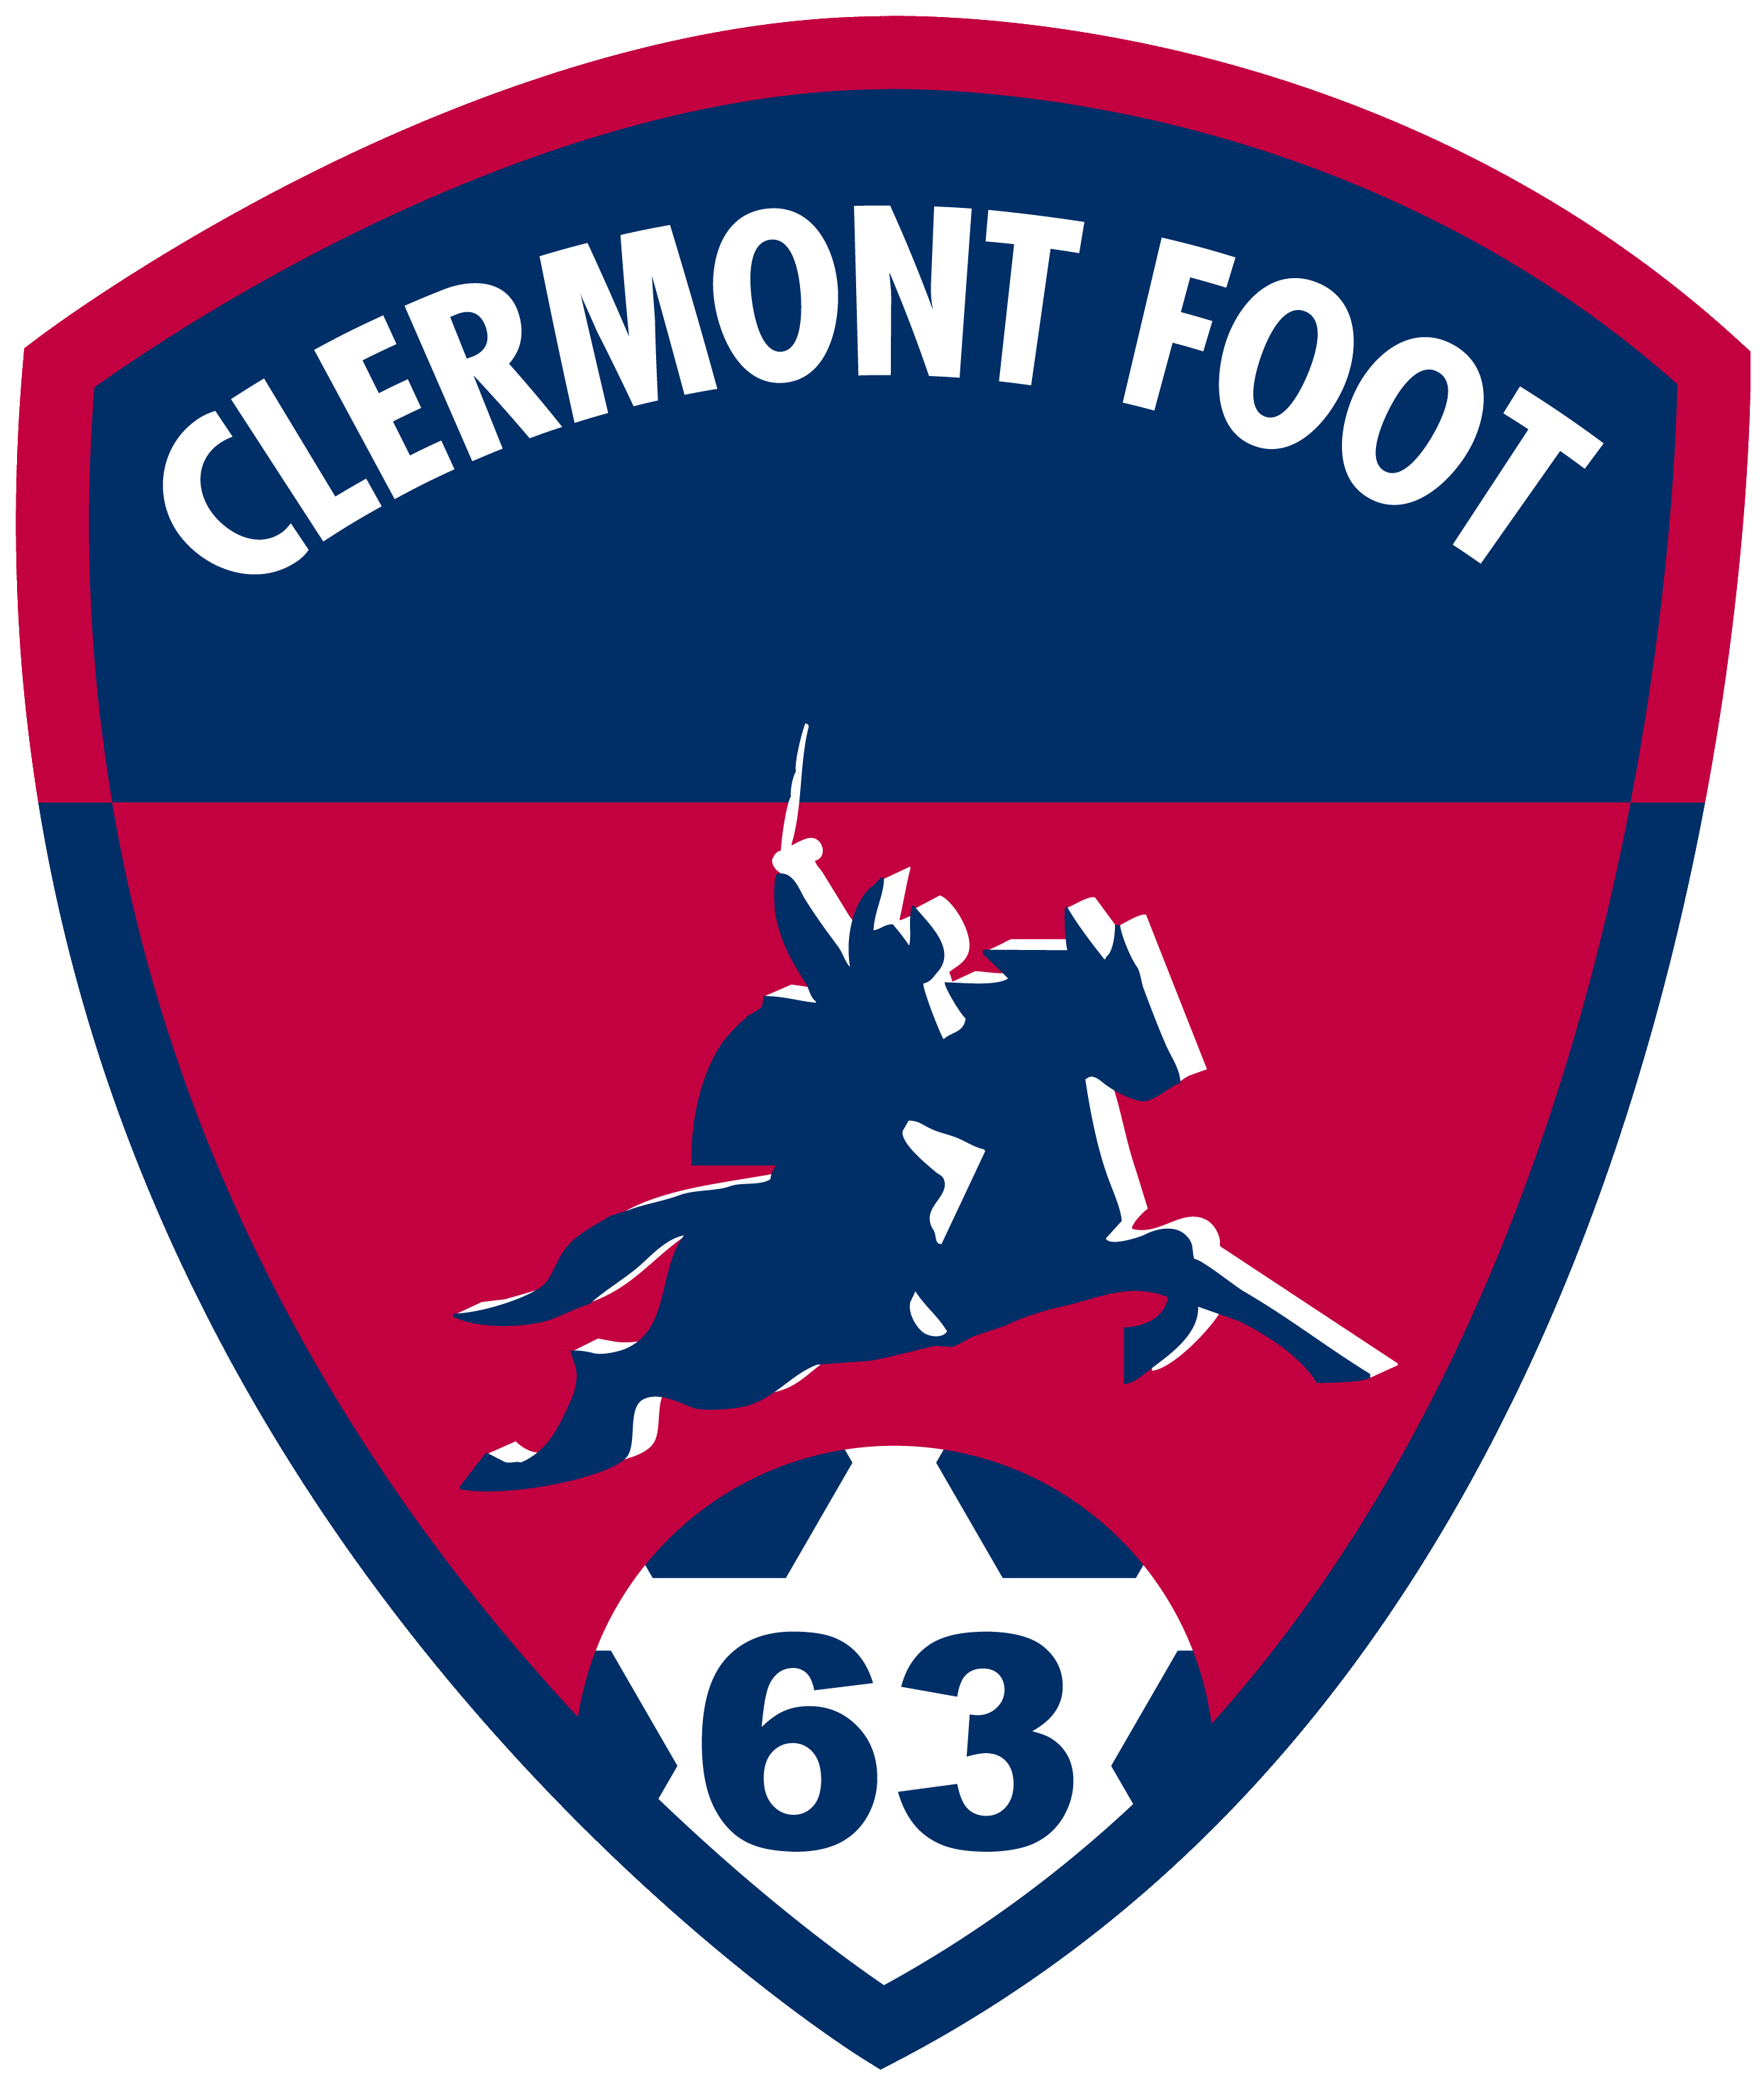 Stade Brest vs Clermont Foot 63 Prediction: Put your money on Brest